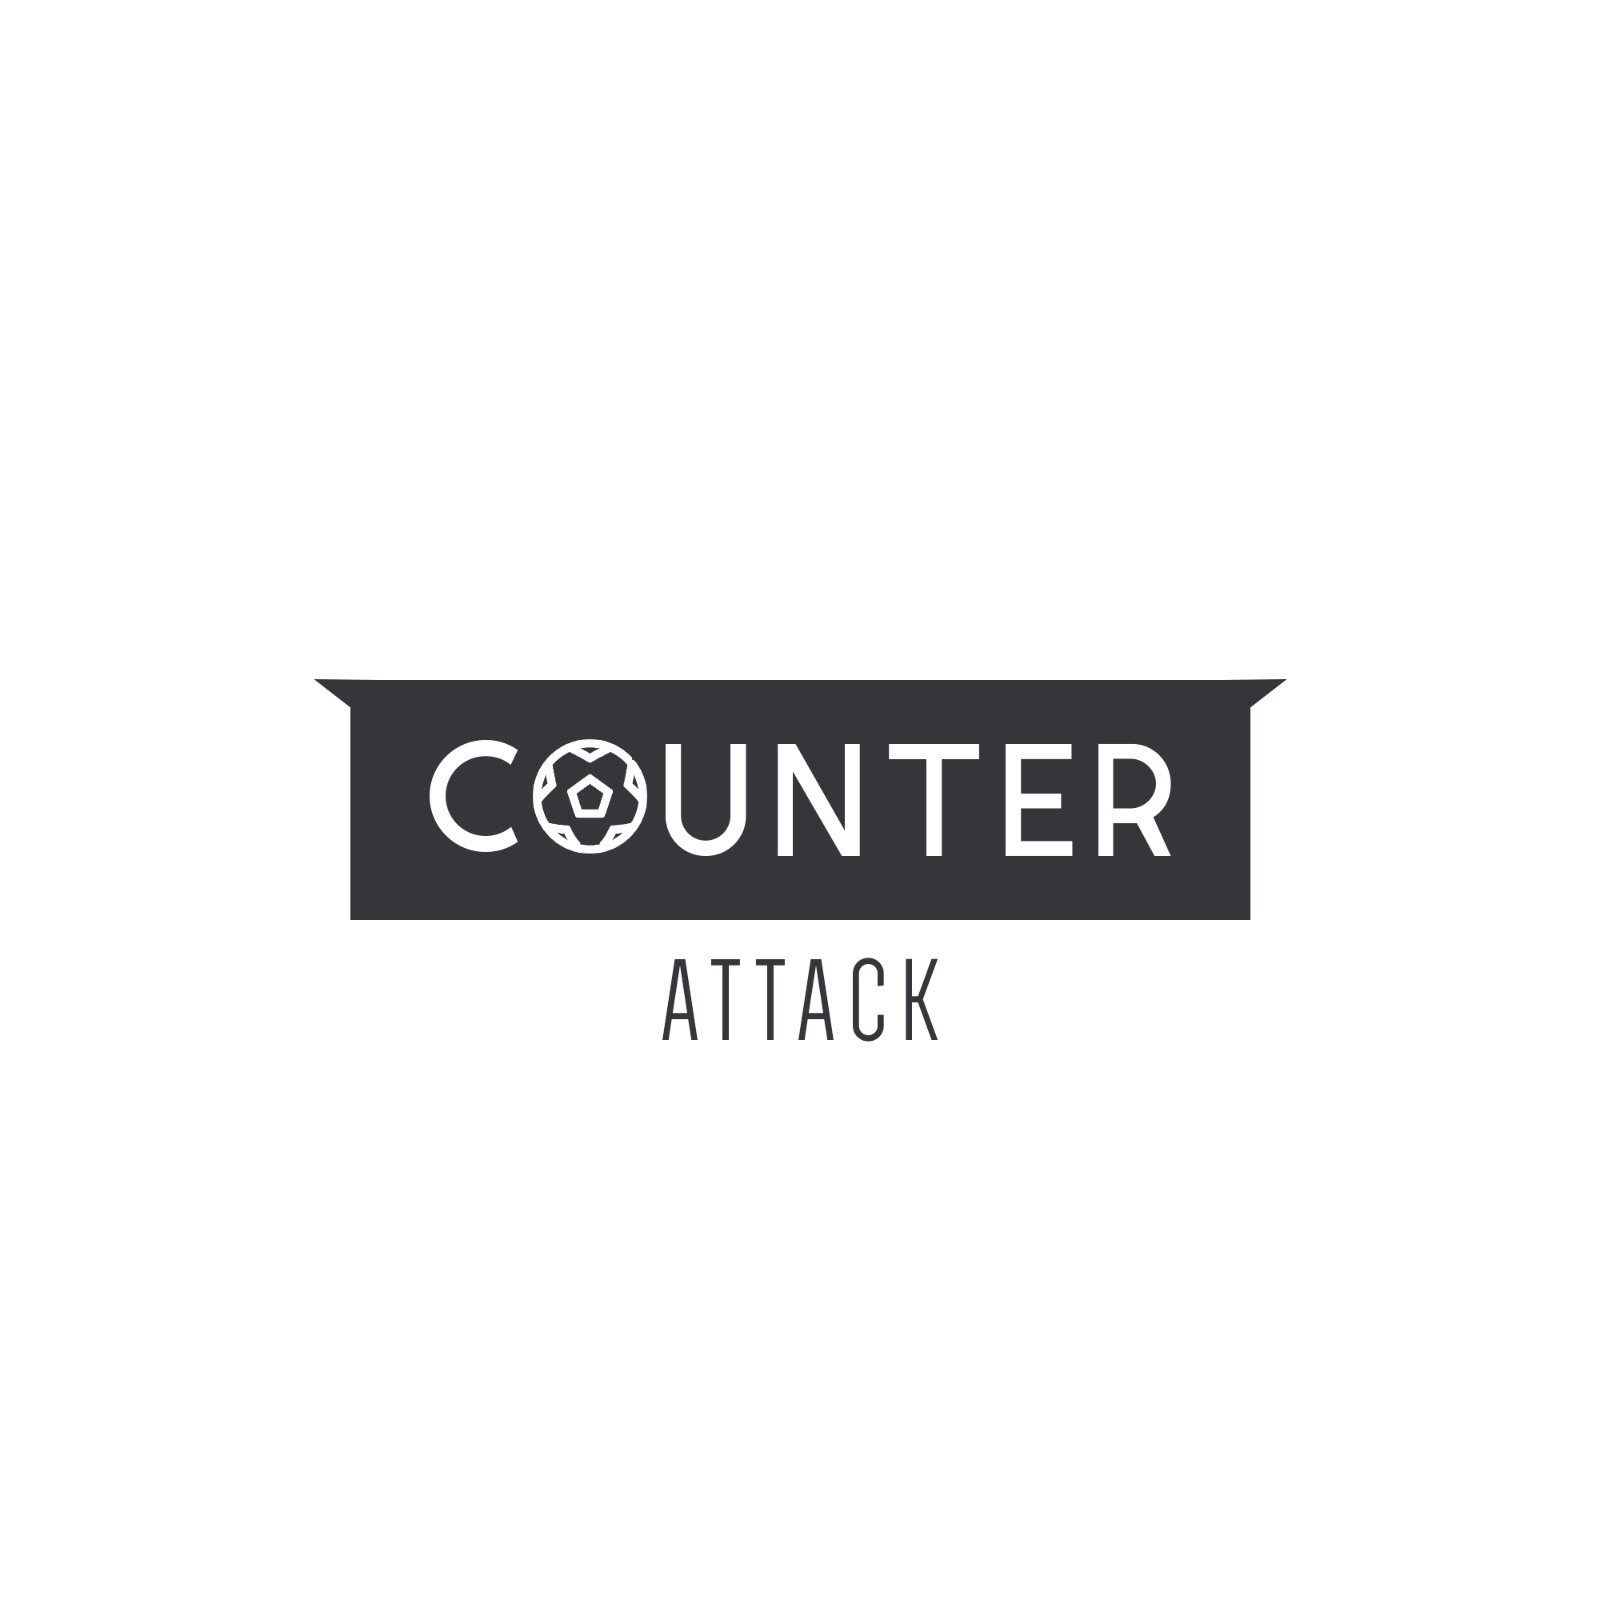 Counter Attack - Episode 106 - Goals Never Done With Chris Dickson